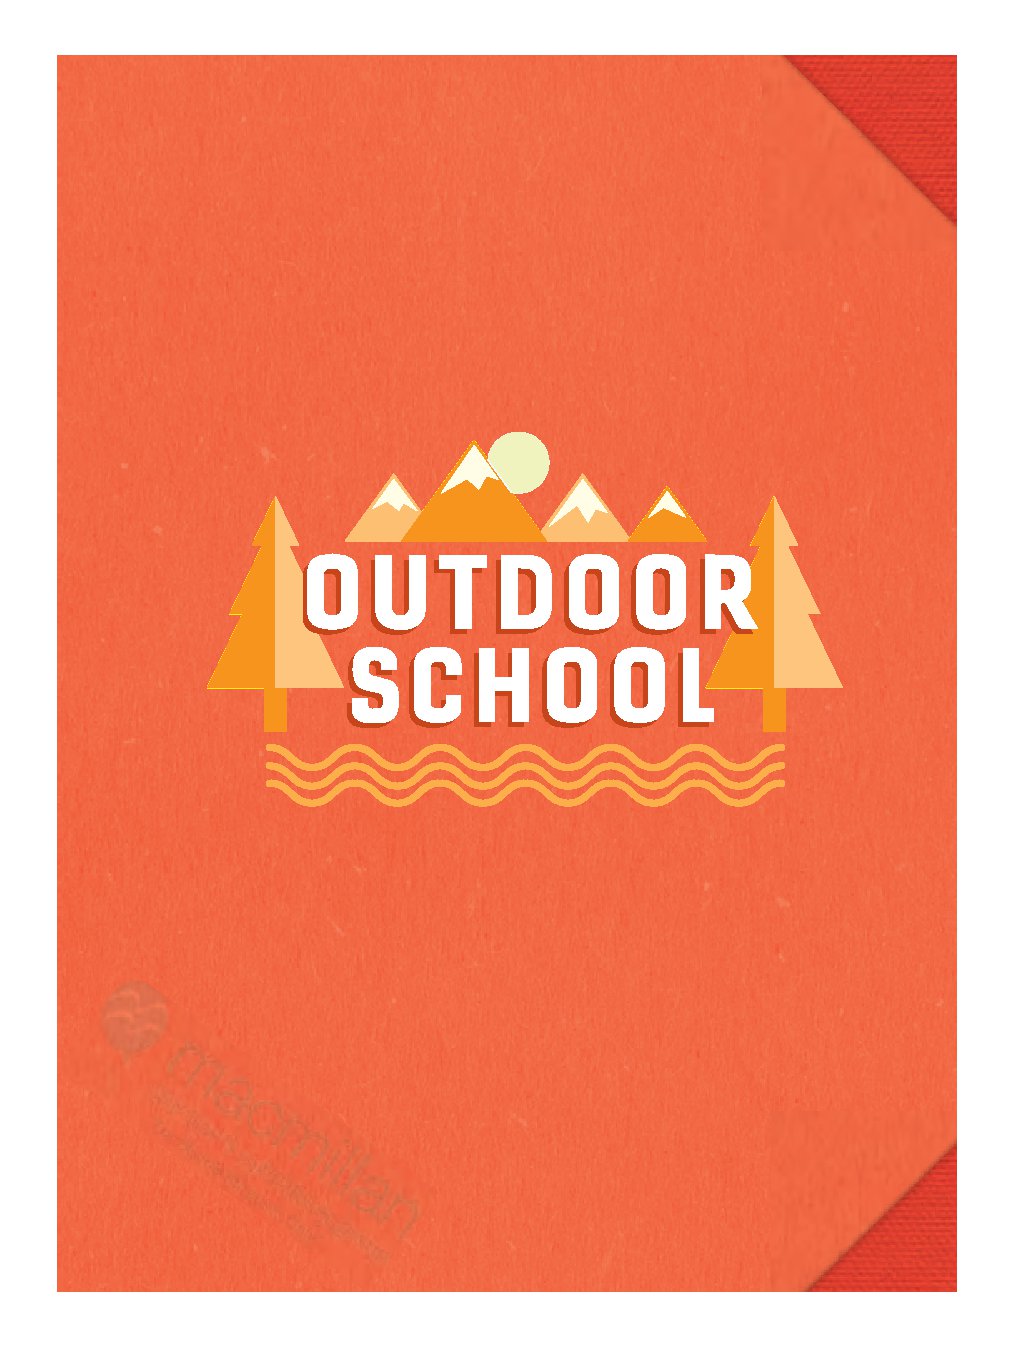 Outdoor School: Rock, Fossil, and Shell Hunting